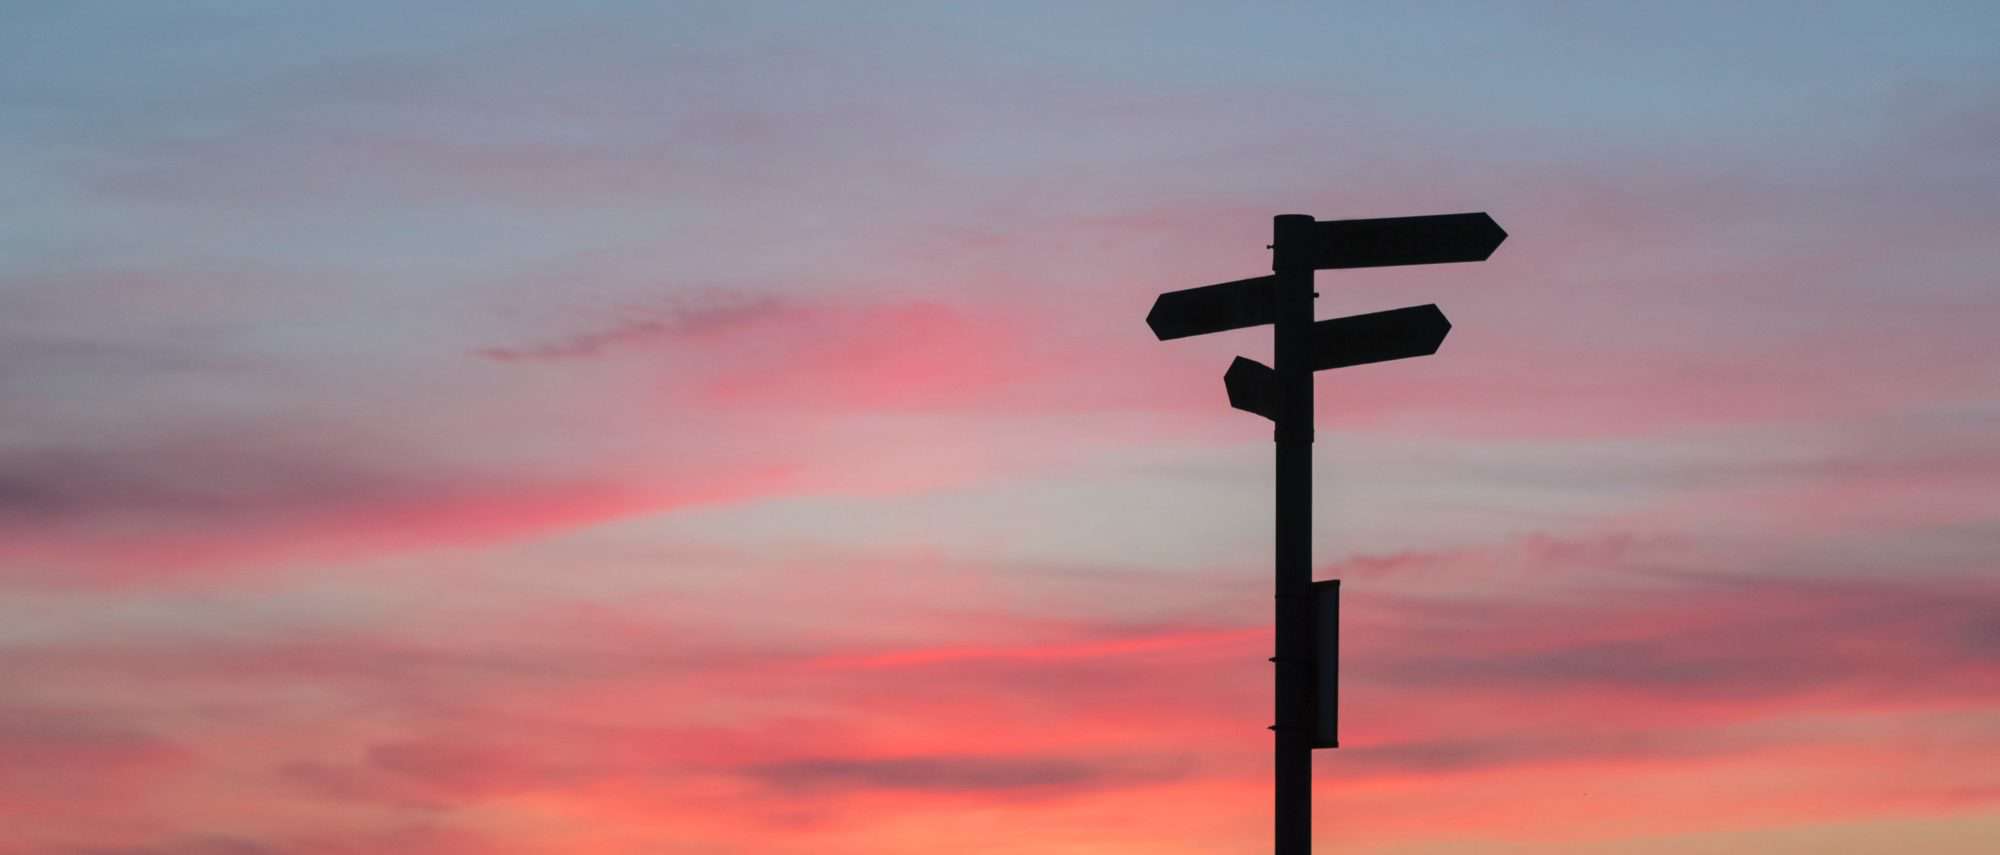 Silhouette of a sign post at sunset